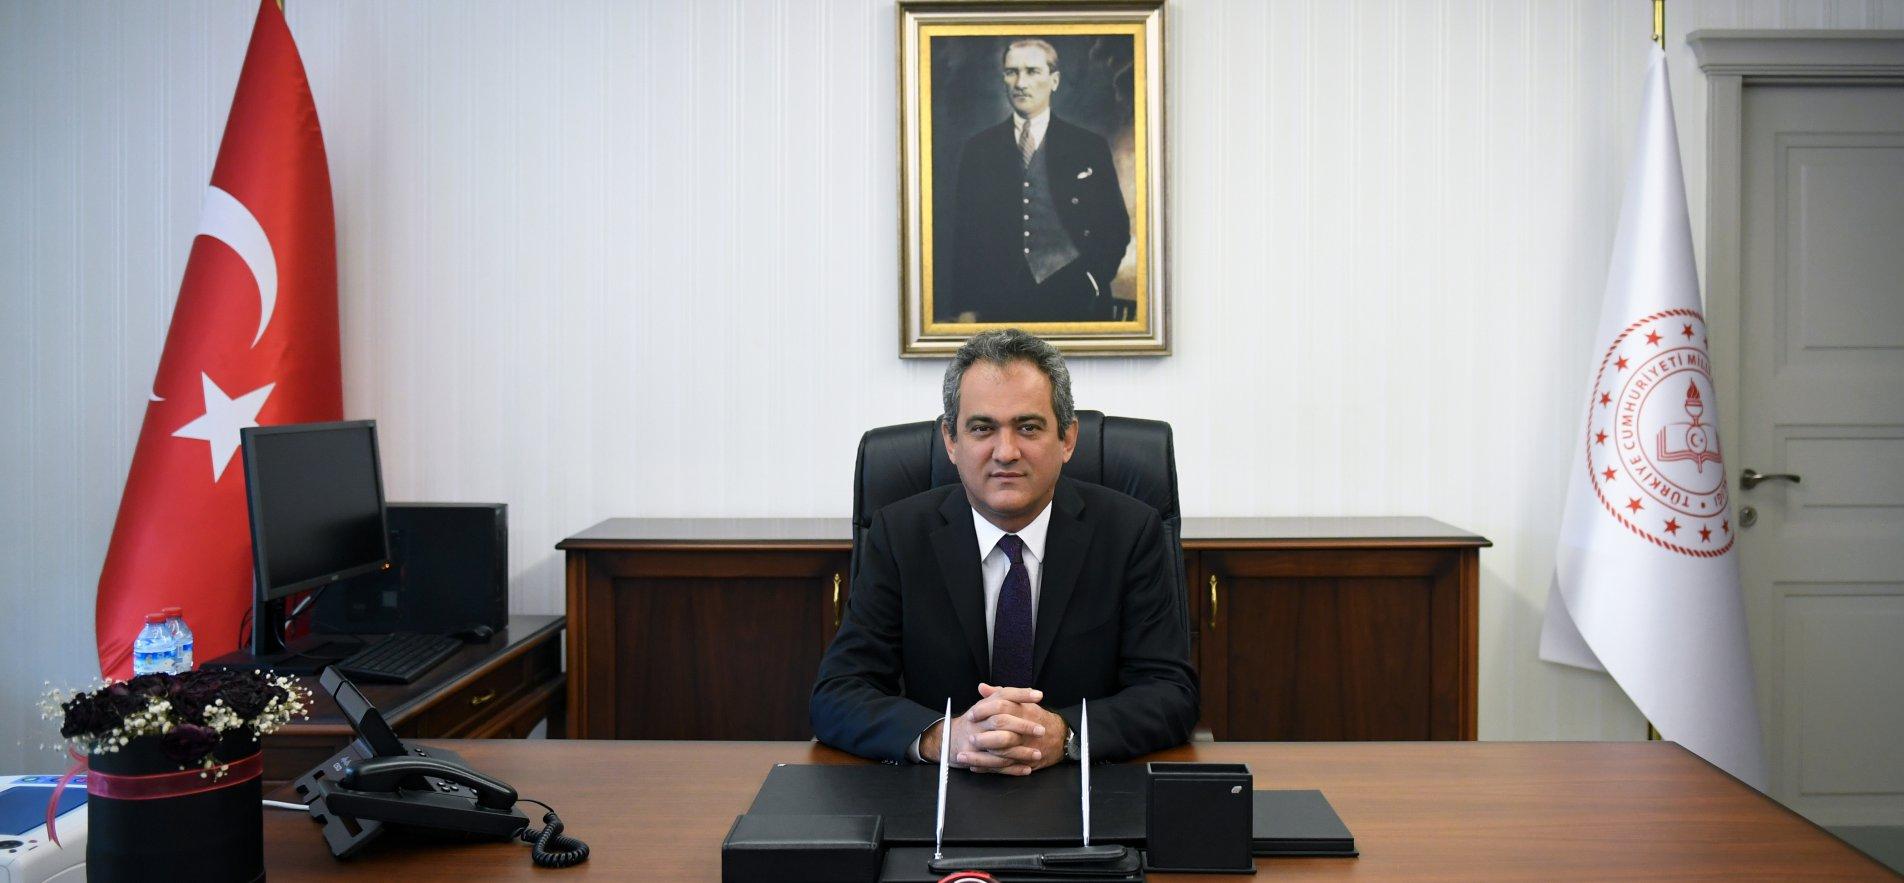 ÖZER: ACHIEVEMENTS IN TIMSS 2019 ARE PROMISING FOR THE FUTURE